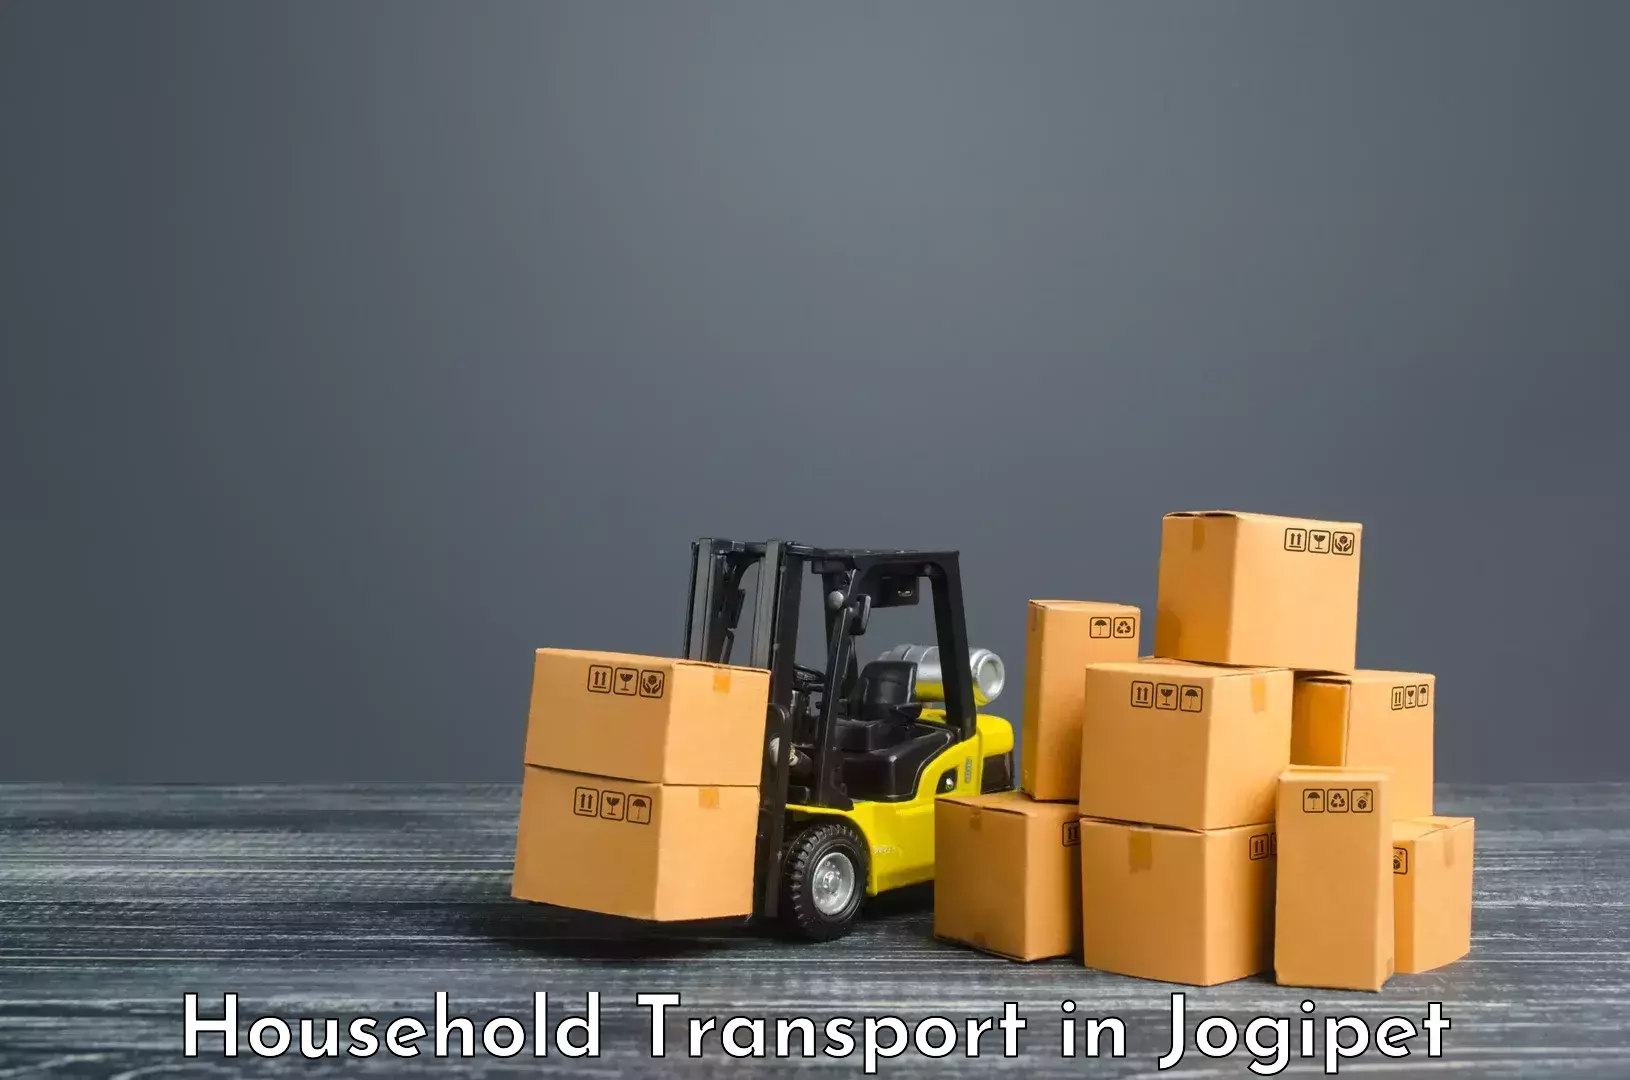 Furniture transport and logistics in Jogipet